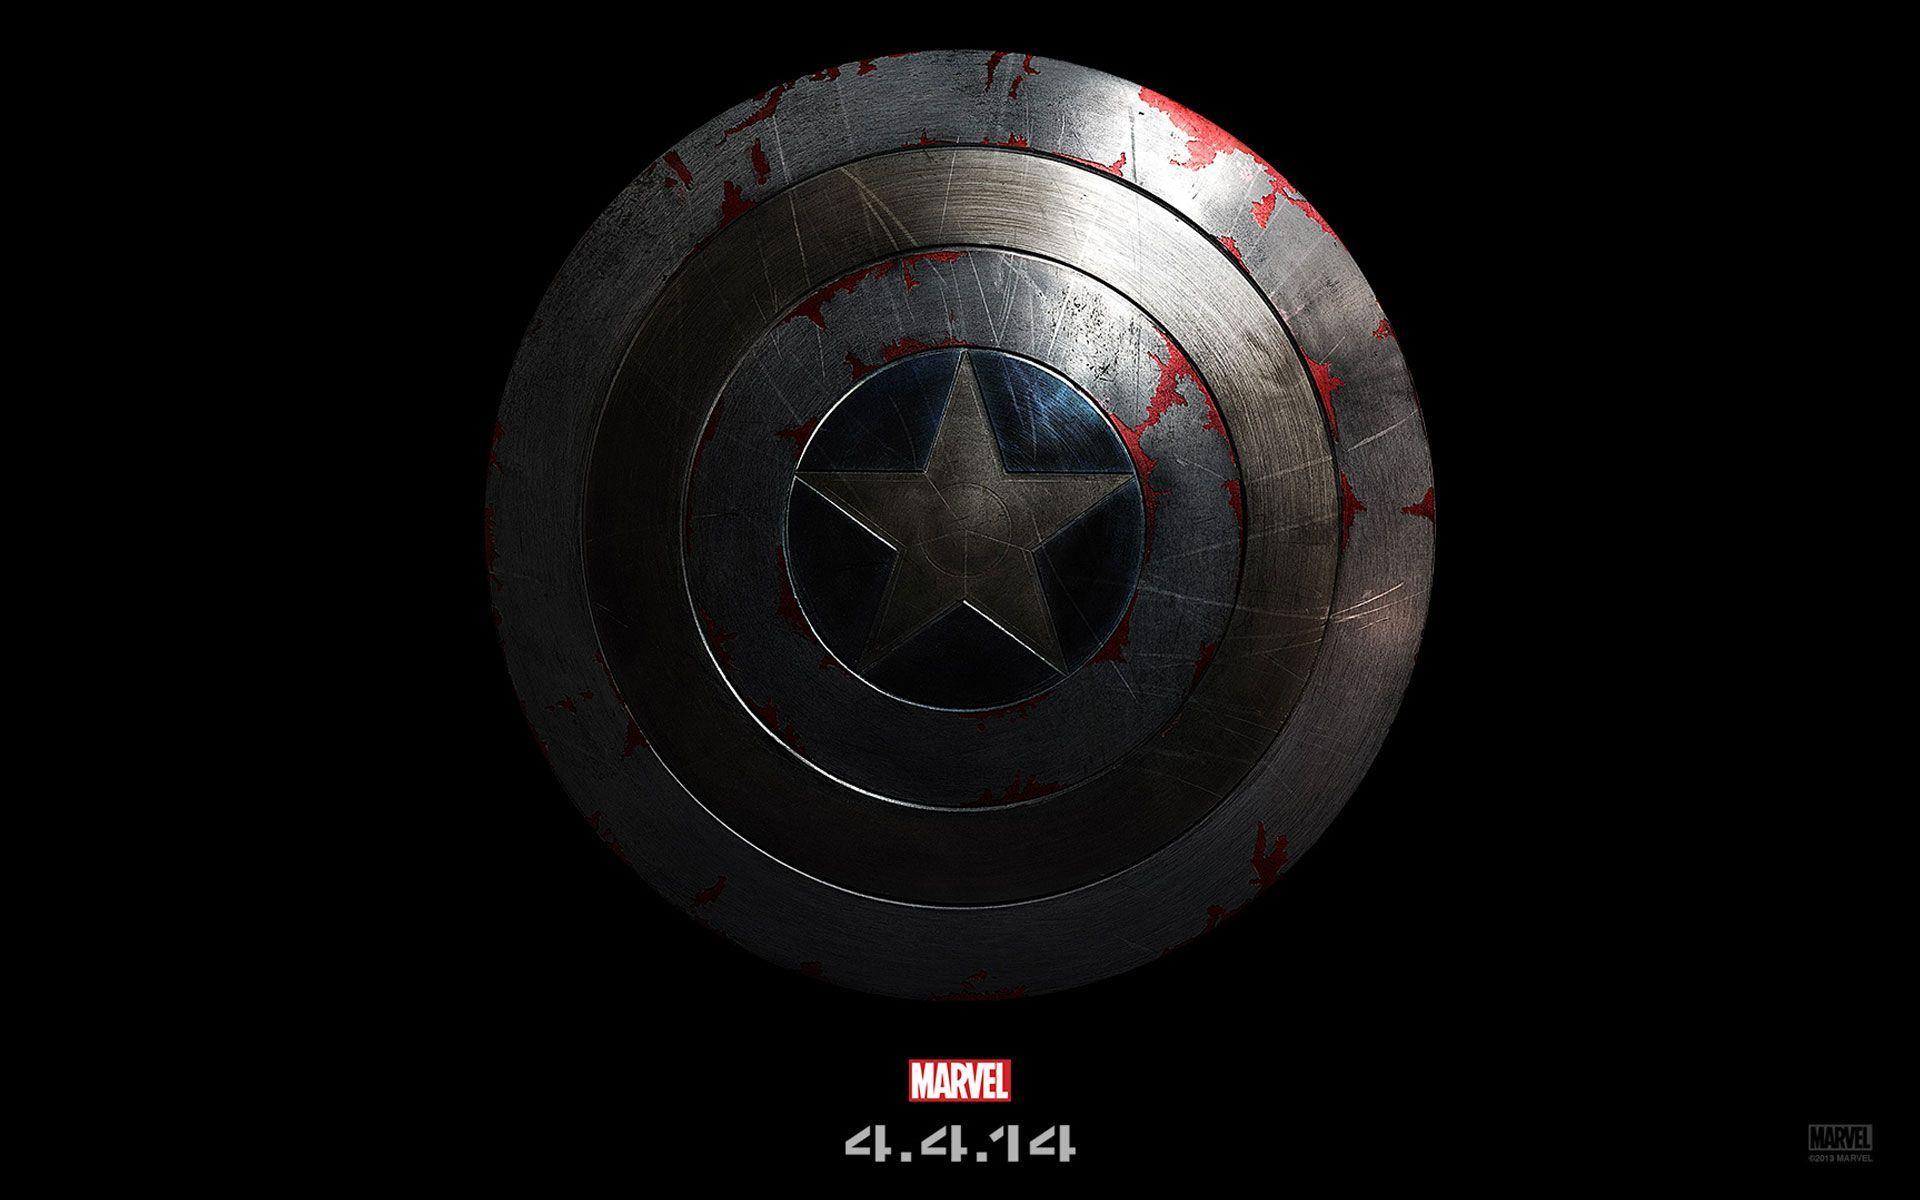 CAPTAIN AMERICA: THE WINTER SOLDIER Wallpaper and Desktop Background